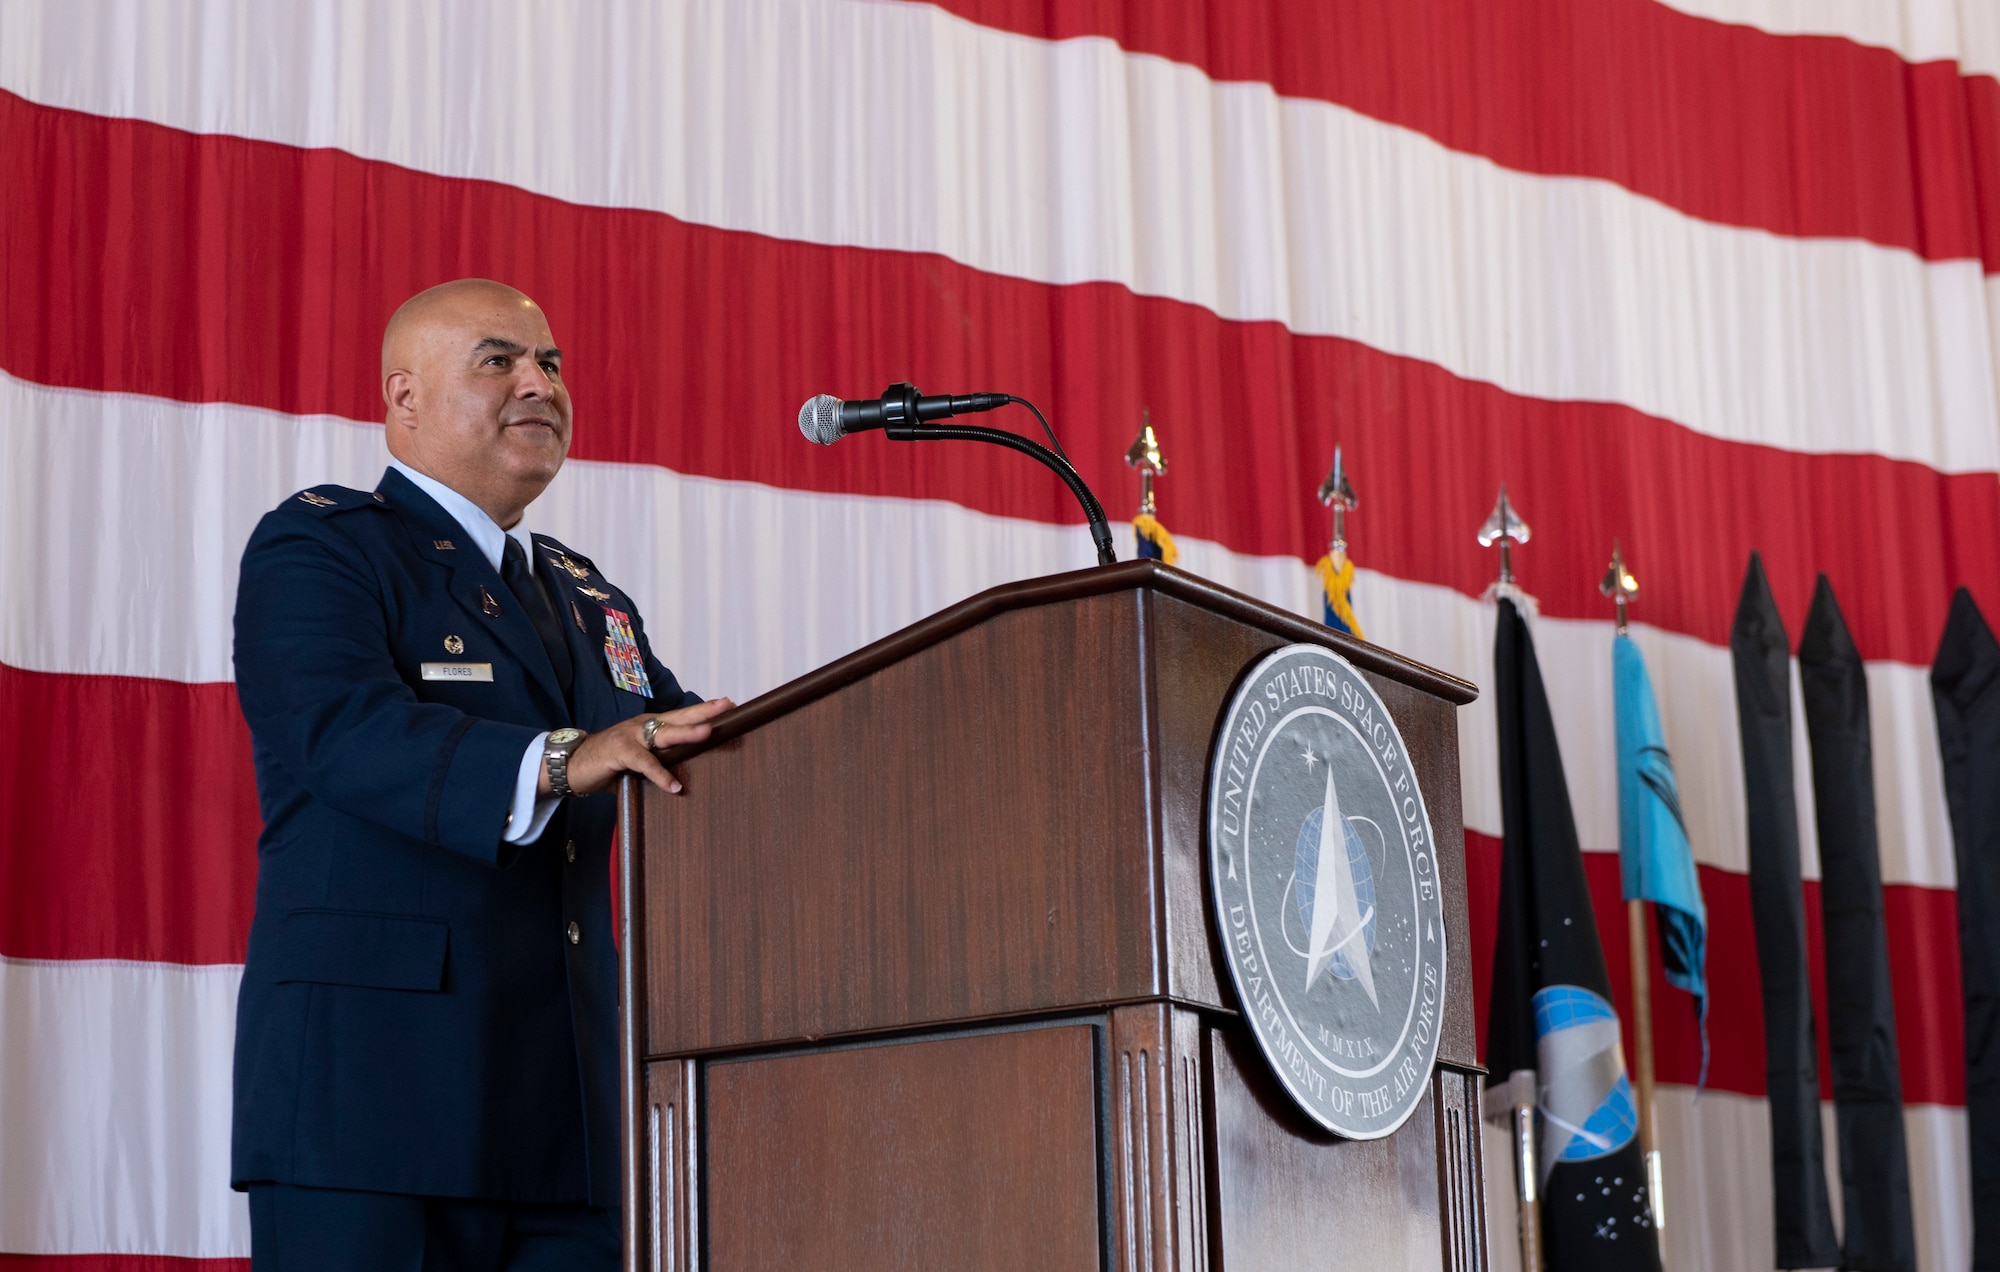 Commander gives speech during a ceremony